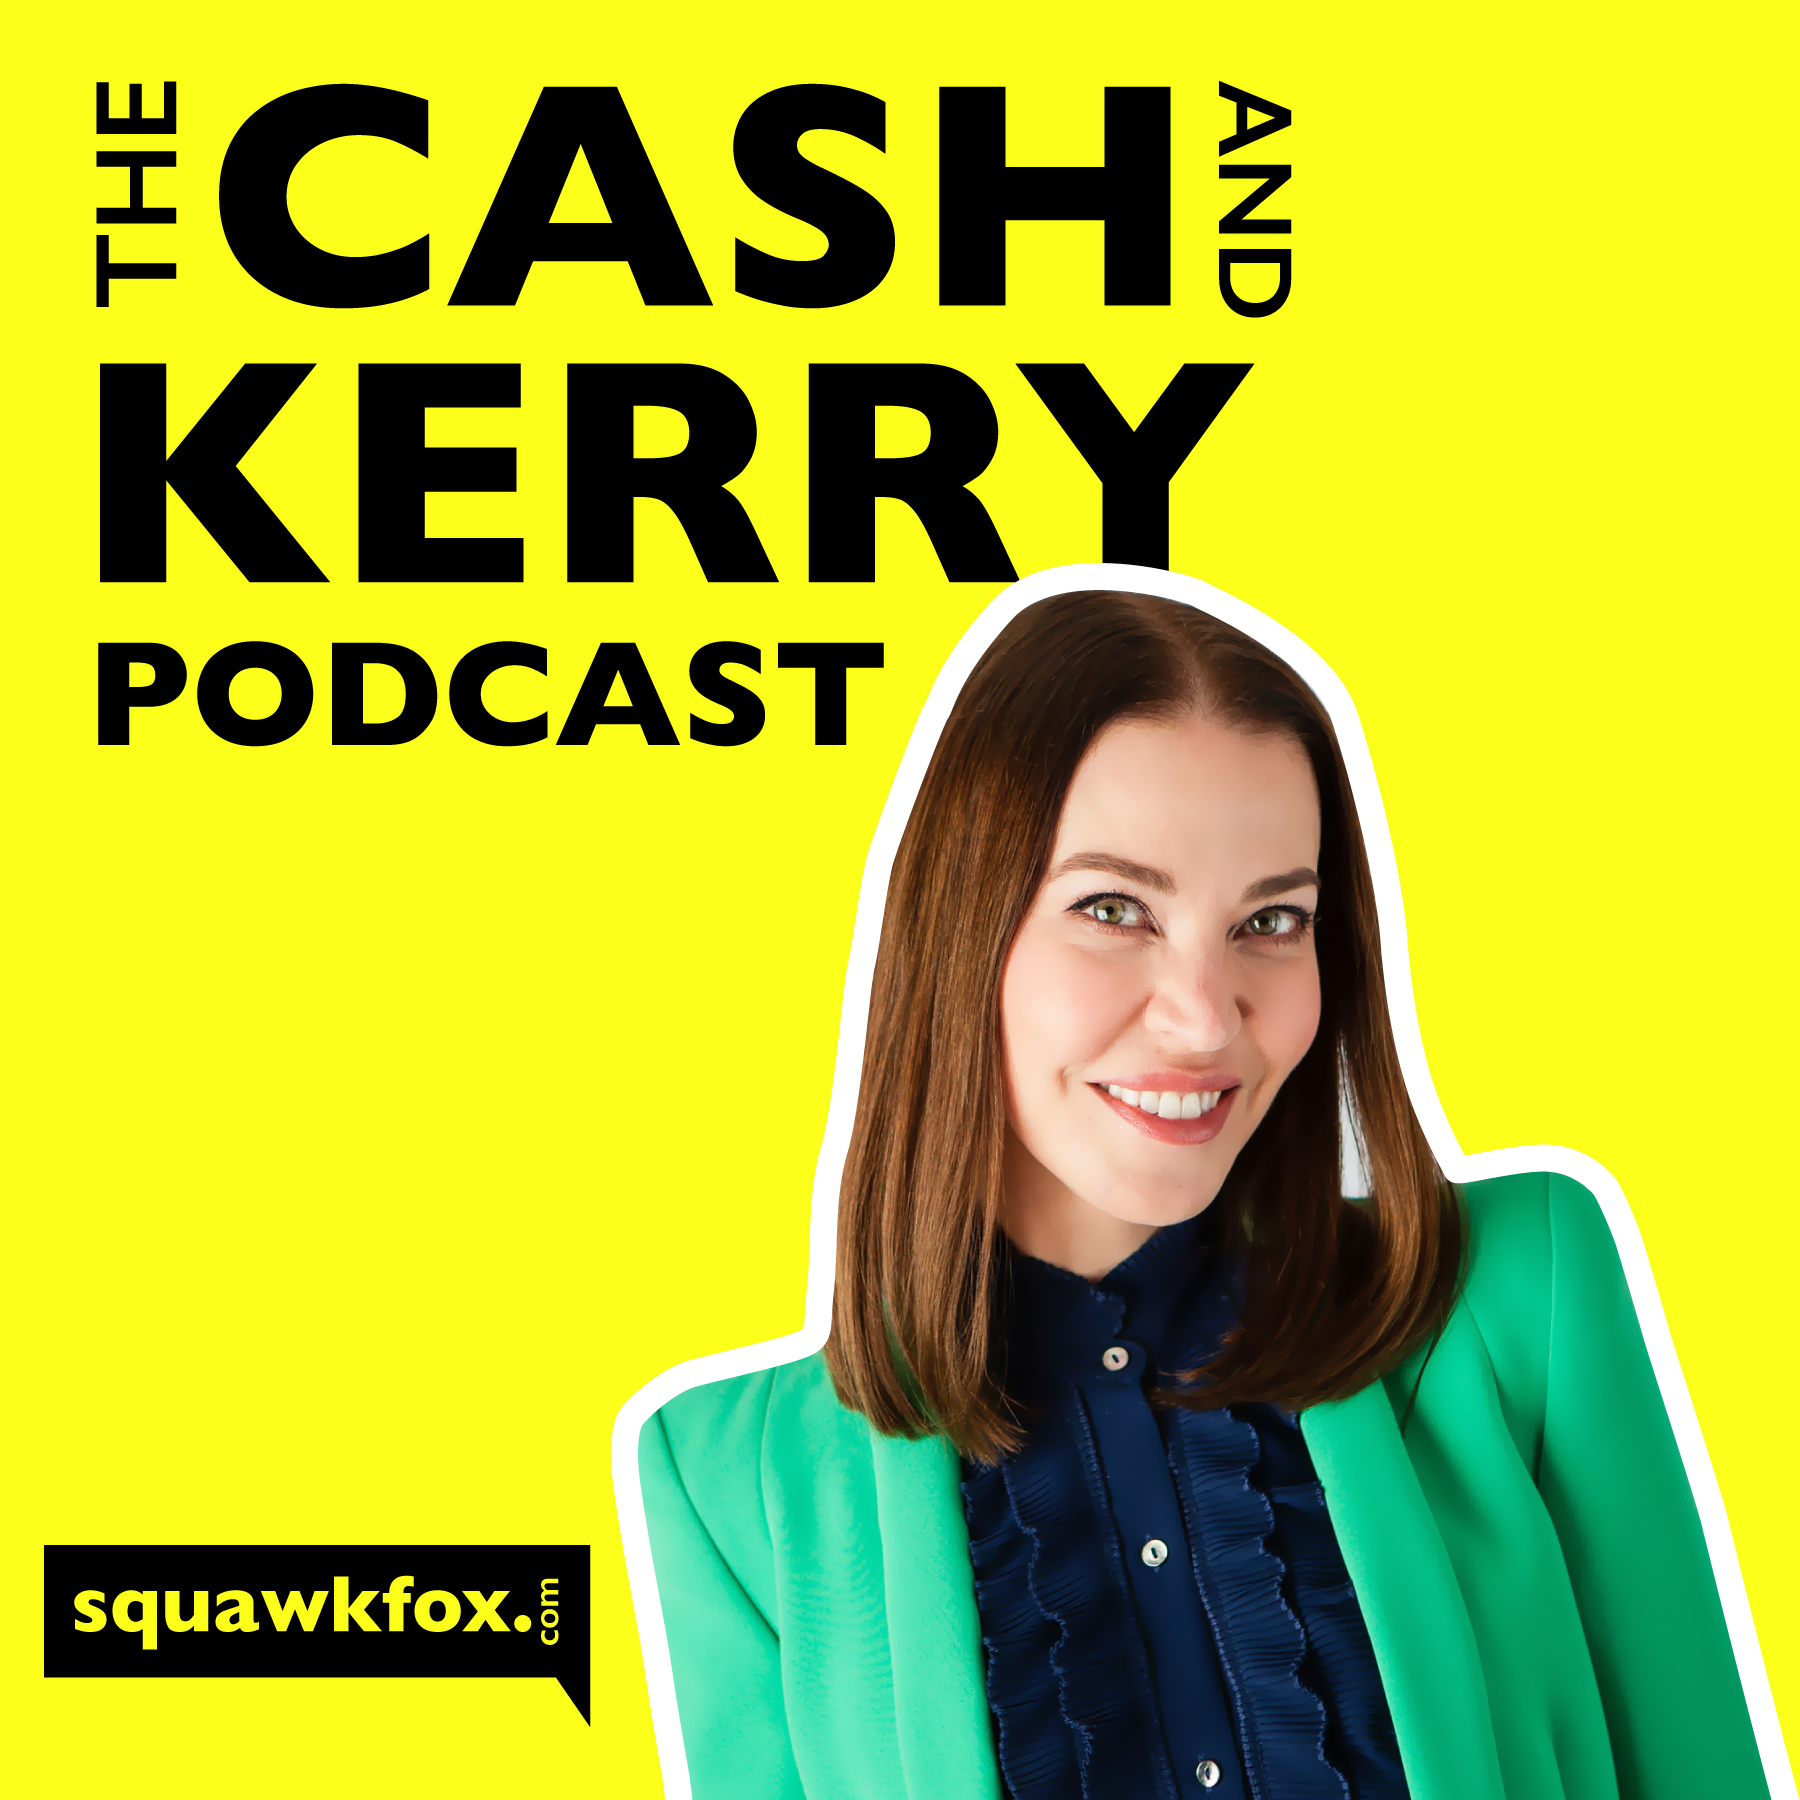 The Cash and Kerry Podcast